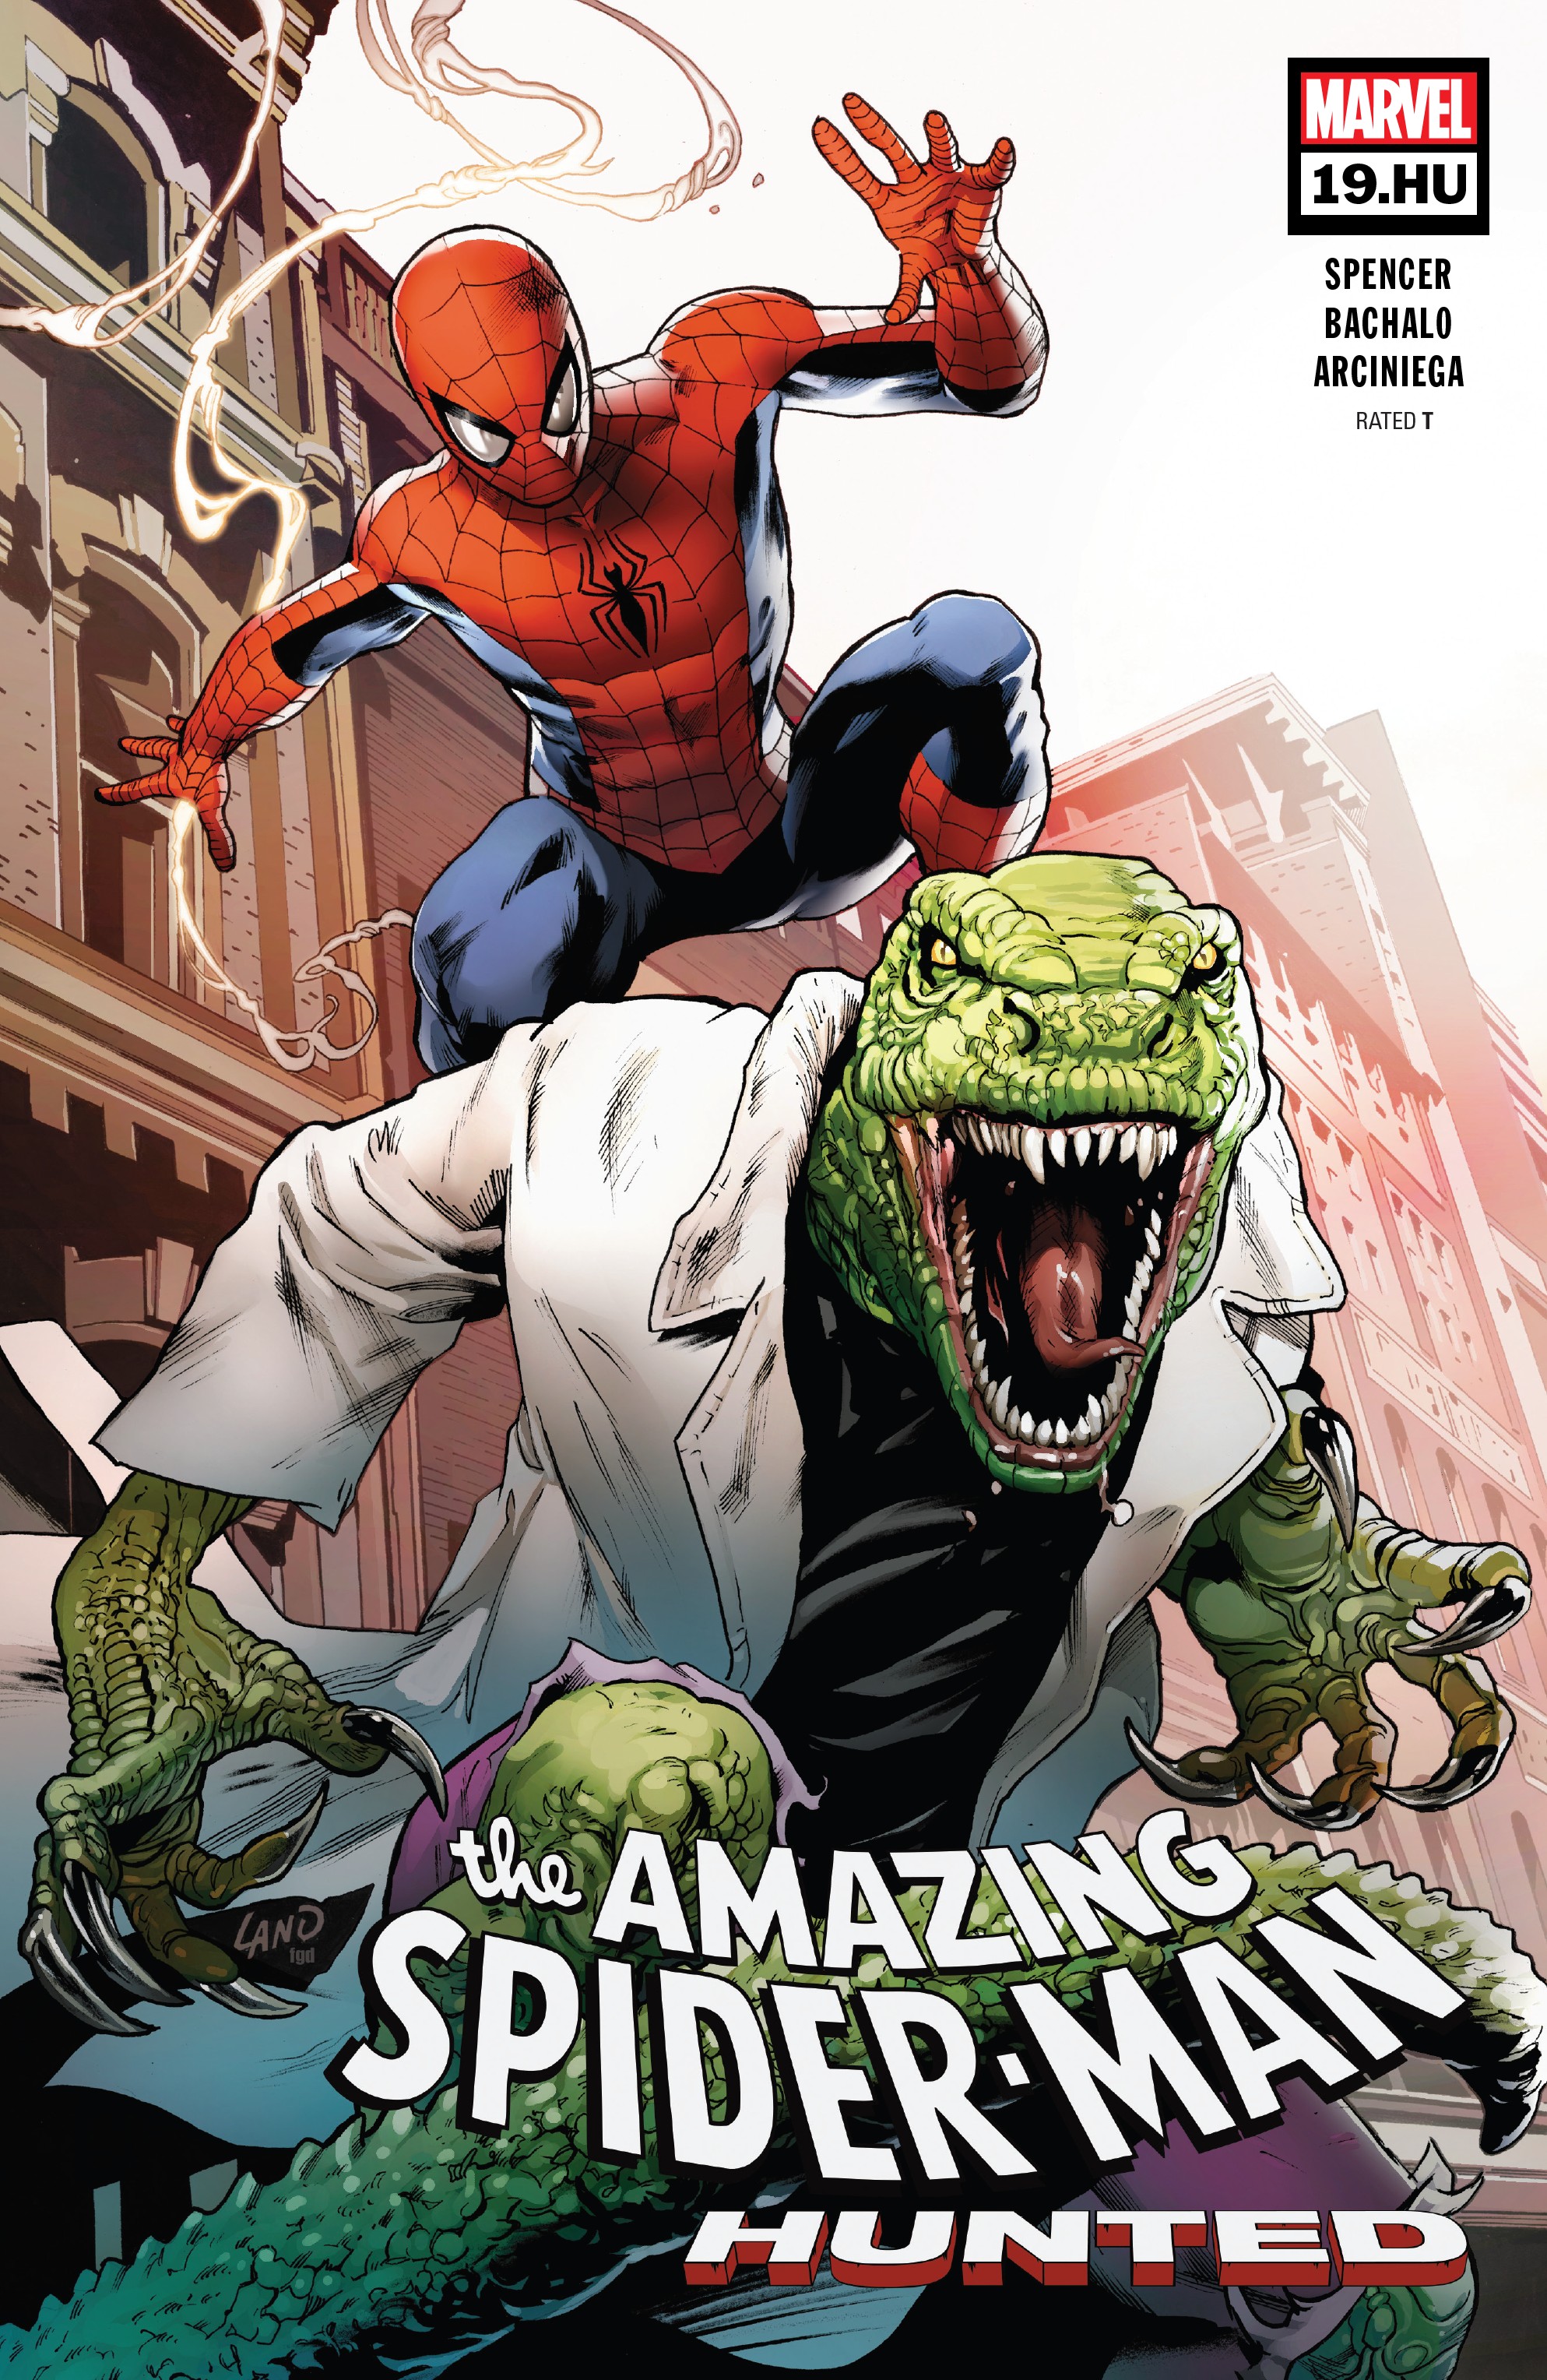 Read online The Amazing Spider-Man (2018) comic -  Issue #19.HU - 1